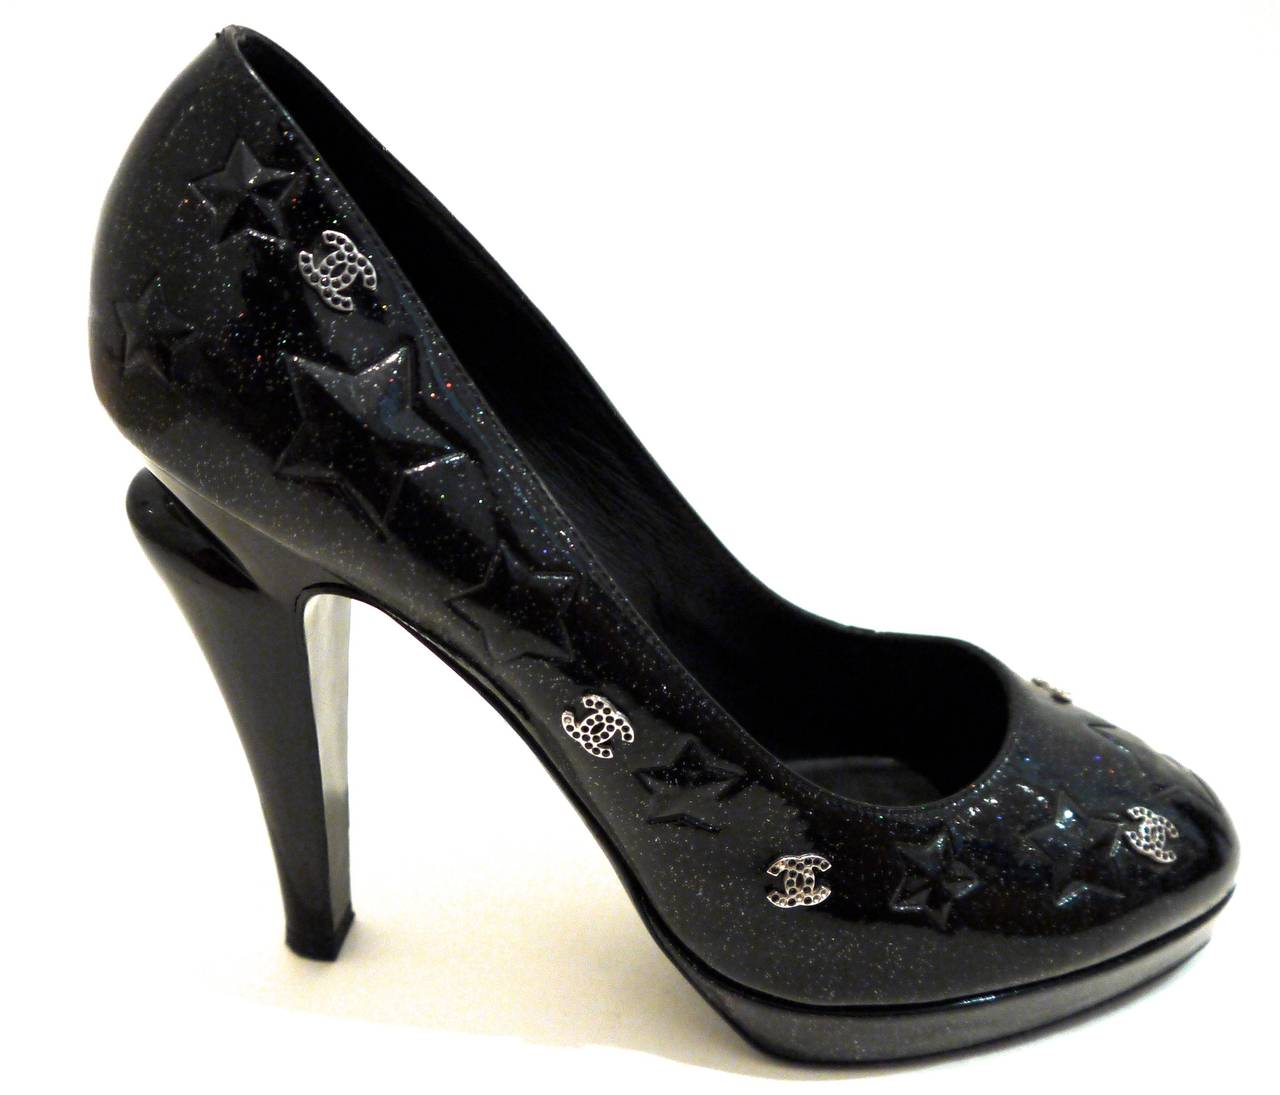 These beautiful Chanel shoes consist of a black patent leather with silver sparkles embedded inside of the leather surrounded by imprinted stars and CC logos with black stones in the logo. These beautiful platform shoes are size 41. They were worn